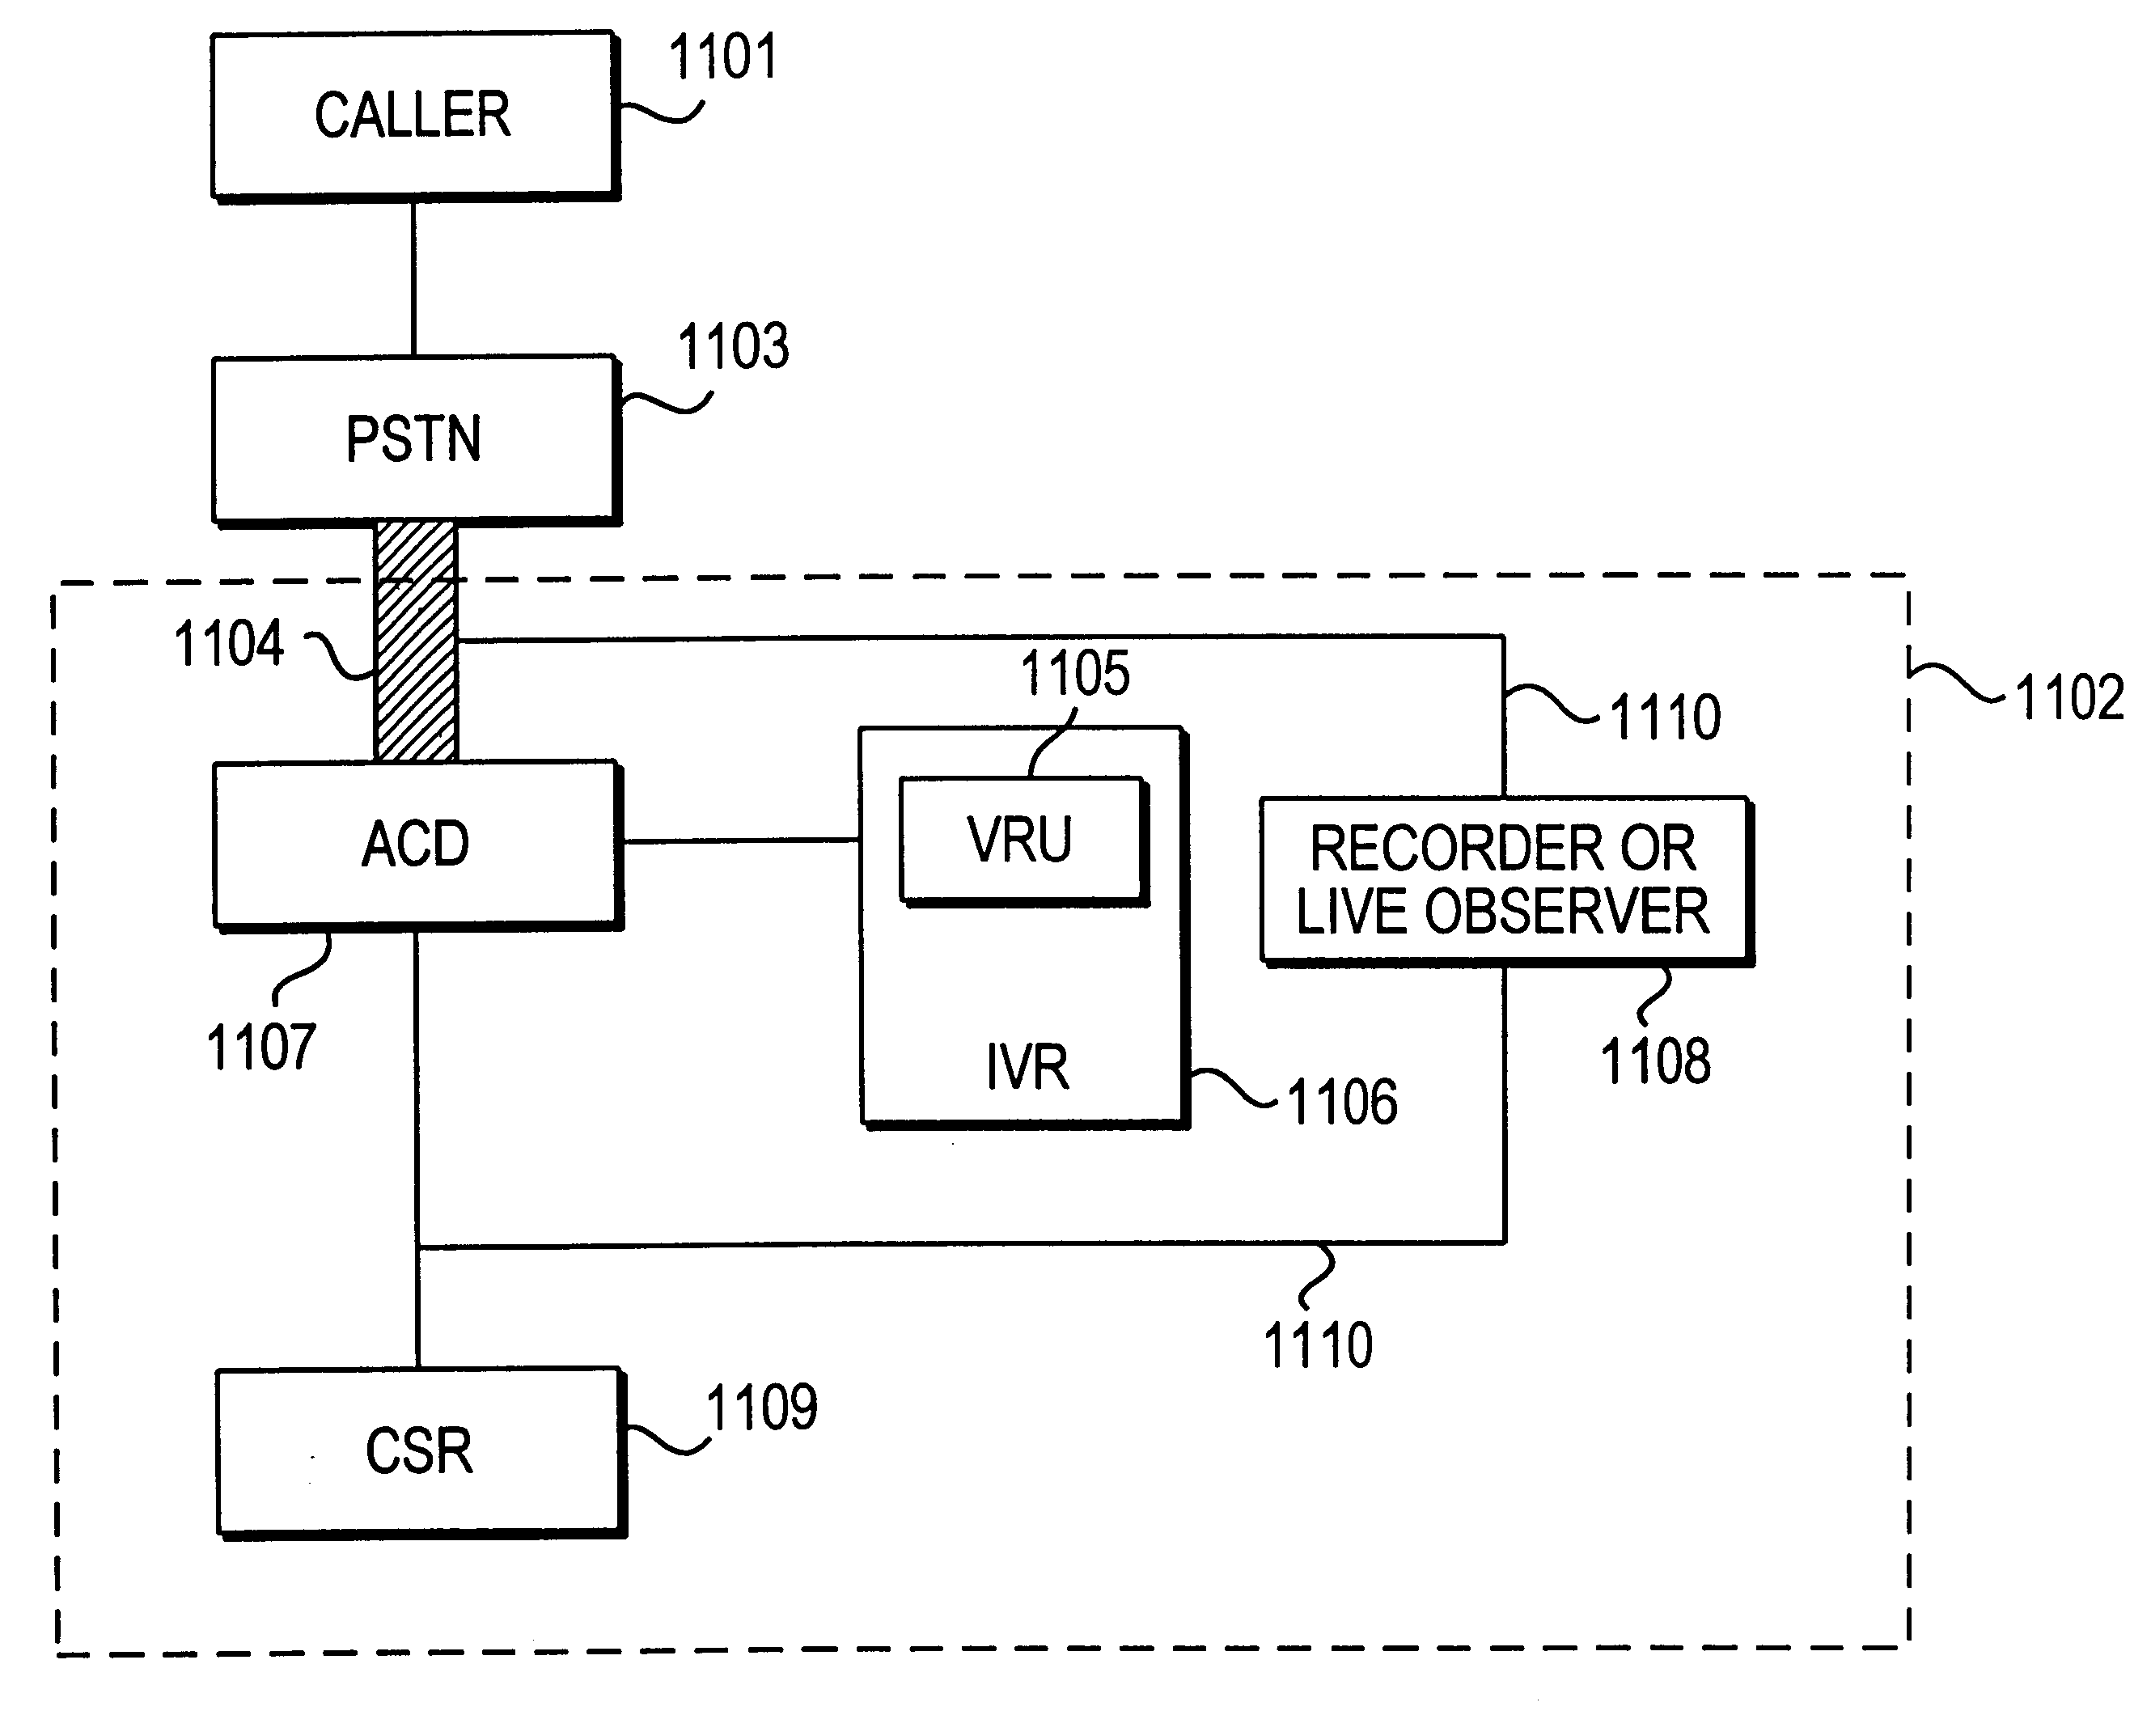 Apparatus and method for analyzing an automated response system